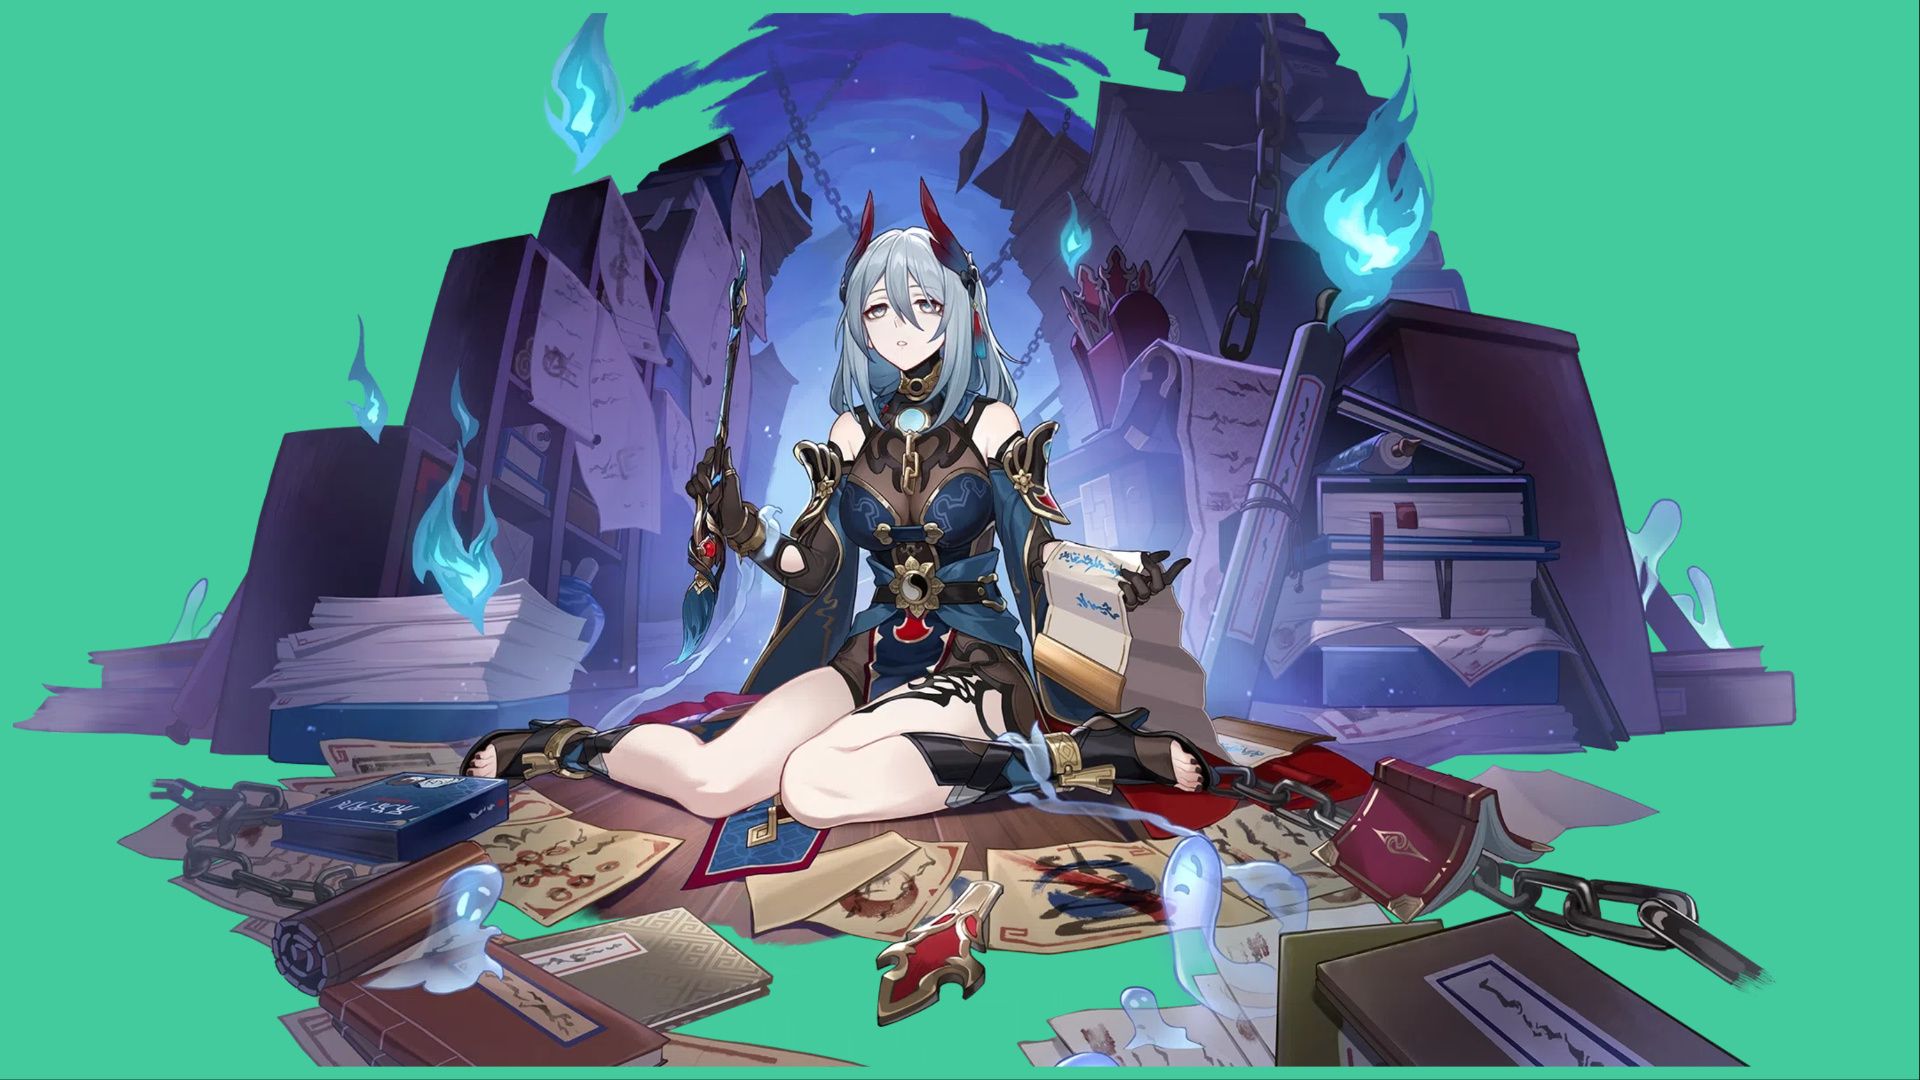 feature image for our honkai star rail hanya tier list, the image features hanya's in-game splash art as she sits on a wooden floor surrounded by paper with ink writing on them as she holds on to a long scroll in one hand and a paint brush in the other, she is also surrounded by shelves and tall stacks of paper in the background as blue flames and ghosts float